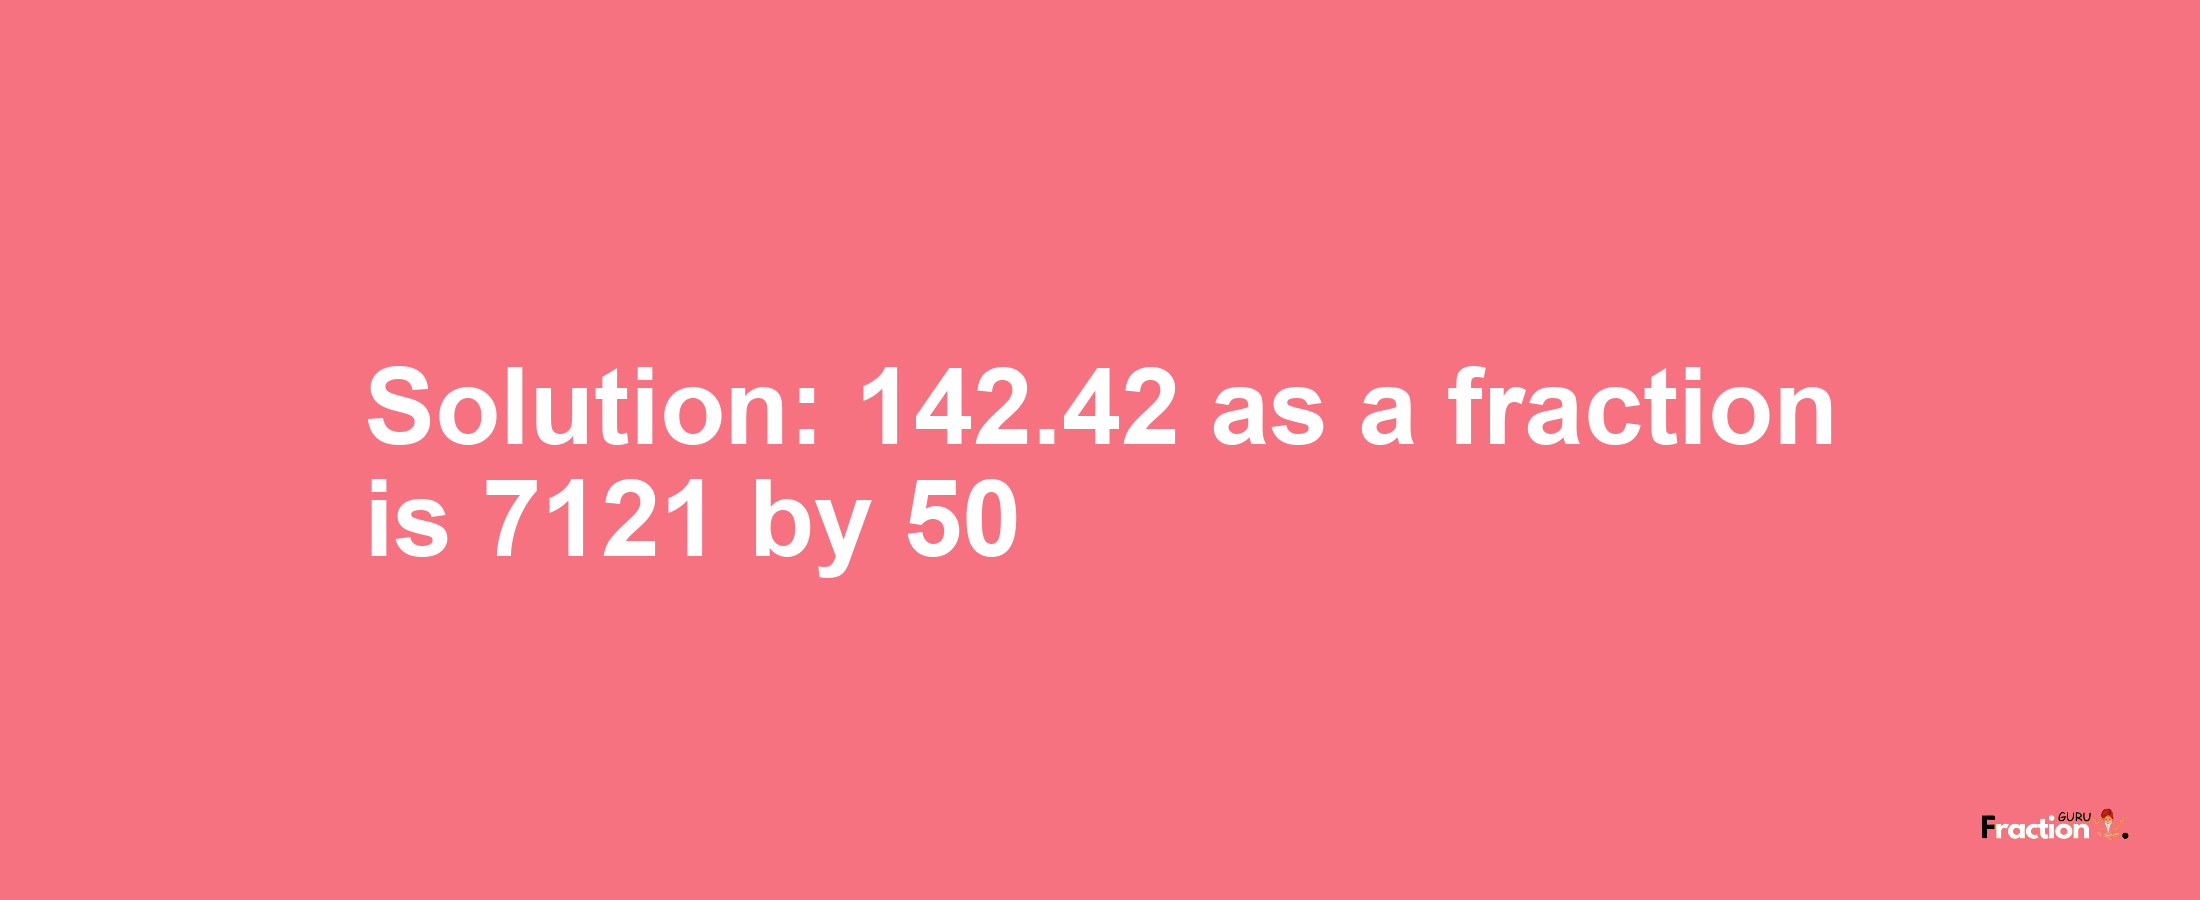 Solution:142.42 as a fraction is 7121/50